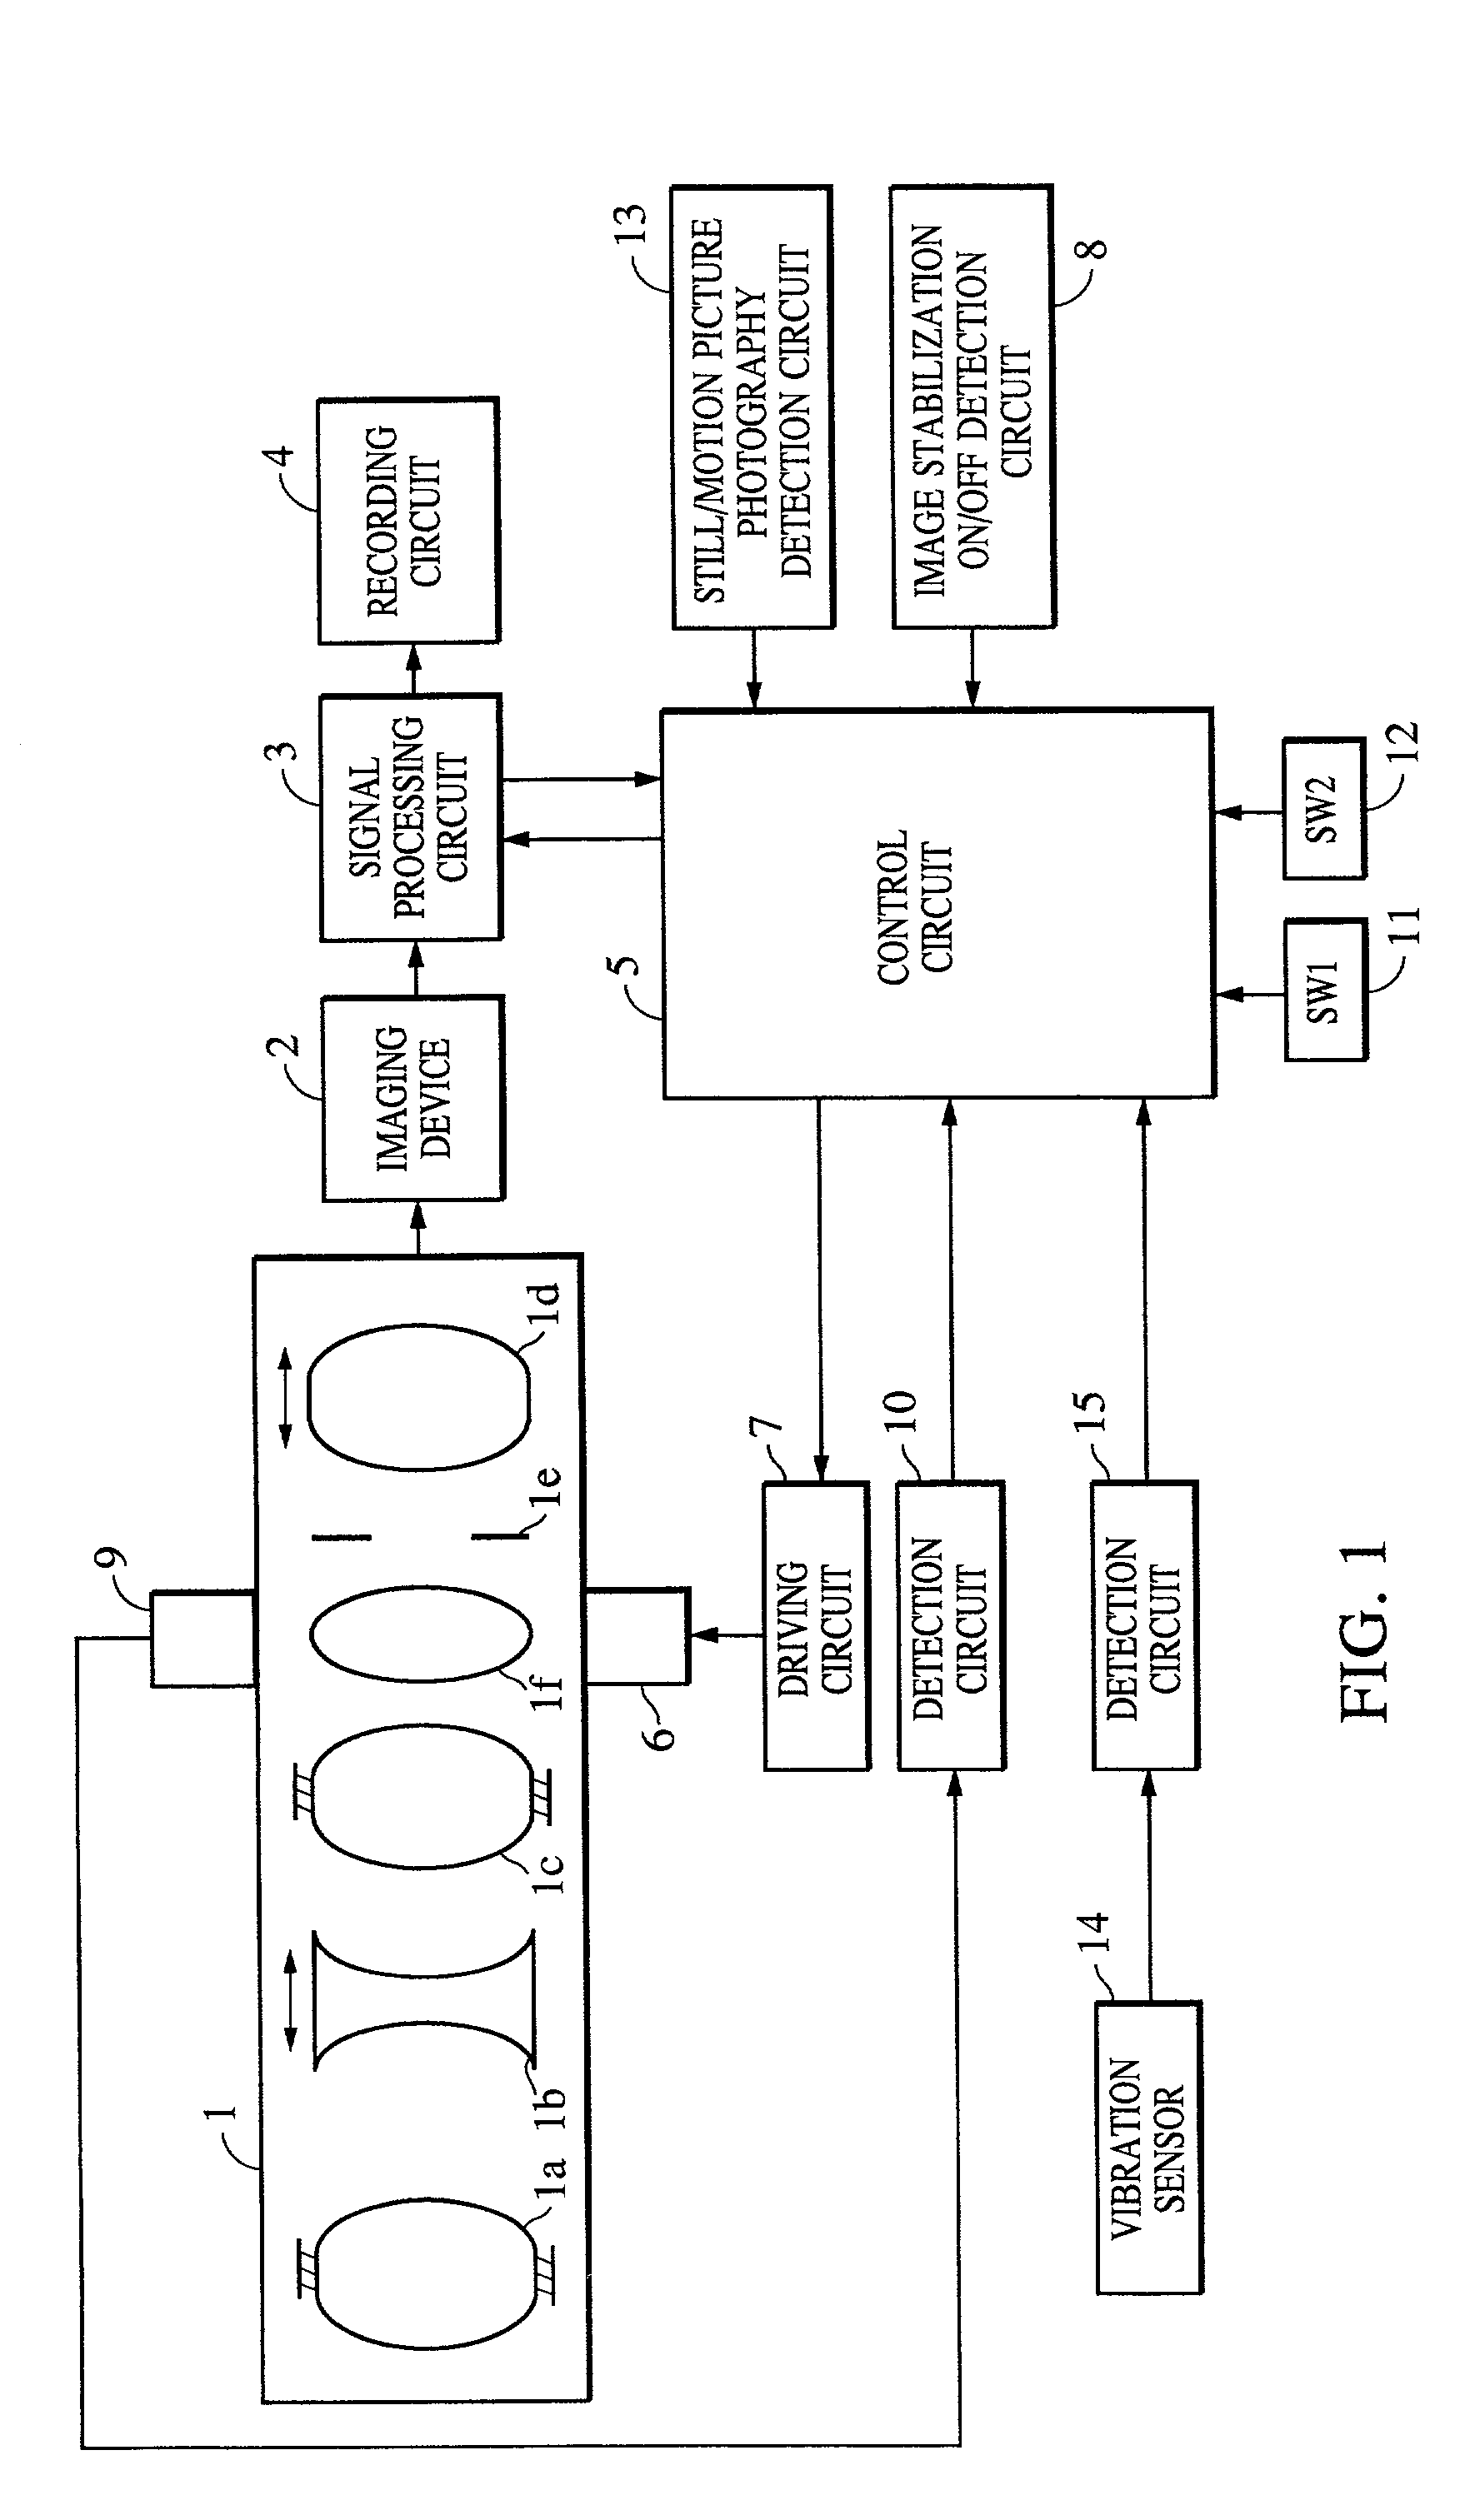 Photographing apparatus having variable image blur correction control characteristics for still photography and motion picture photography